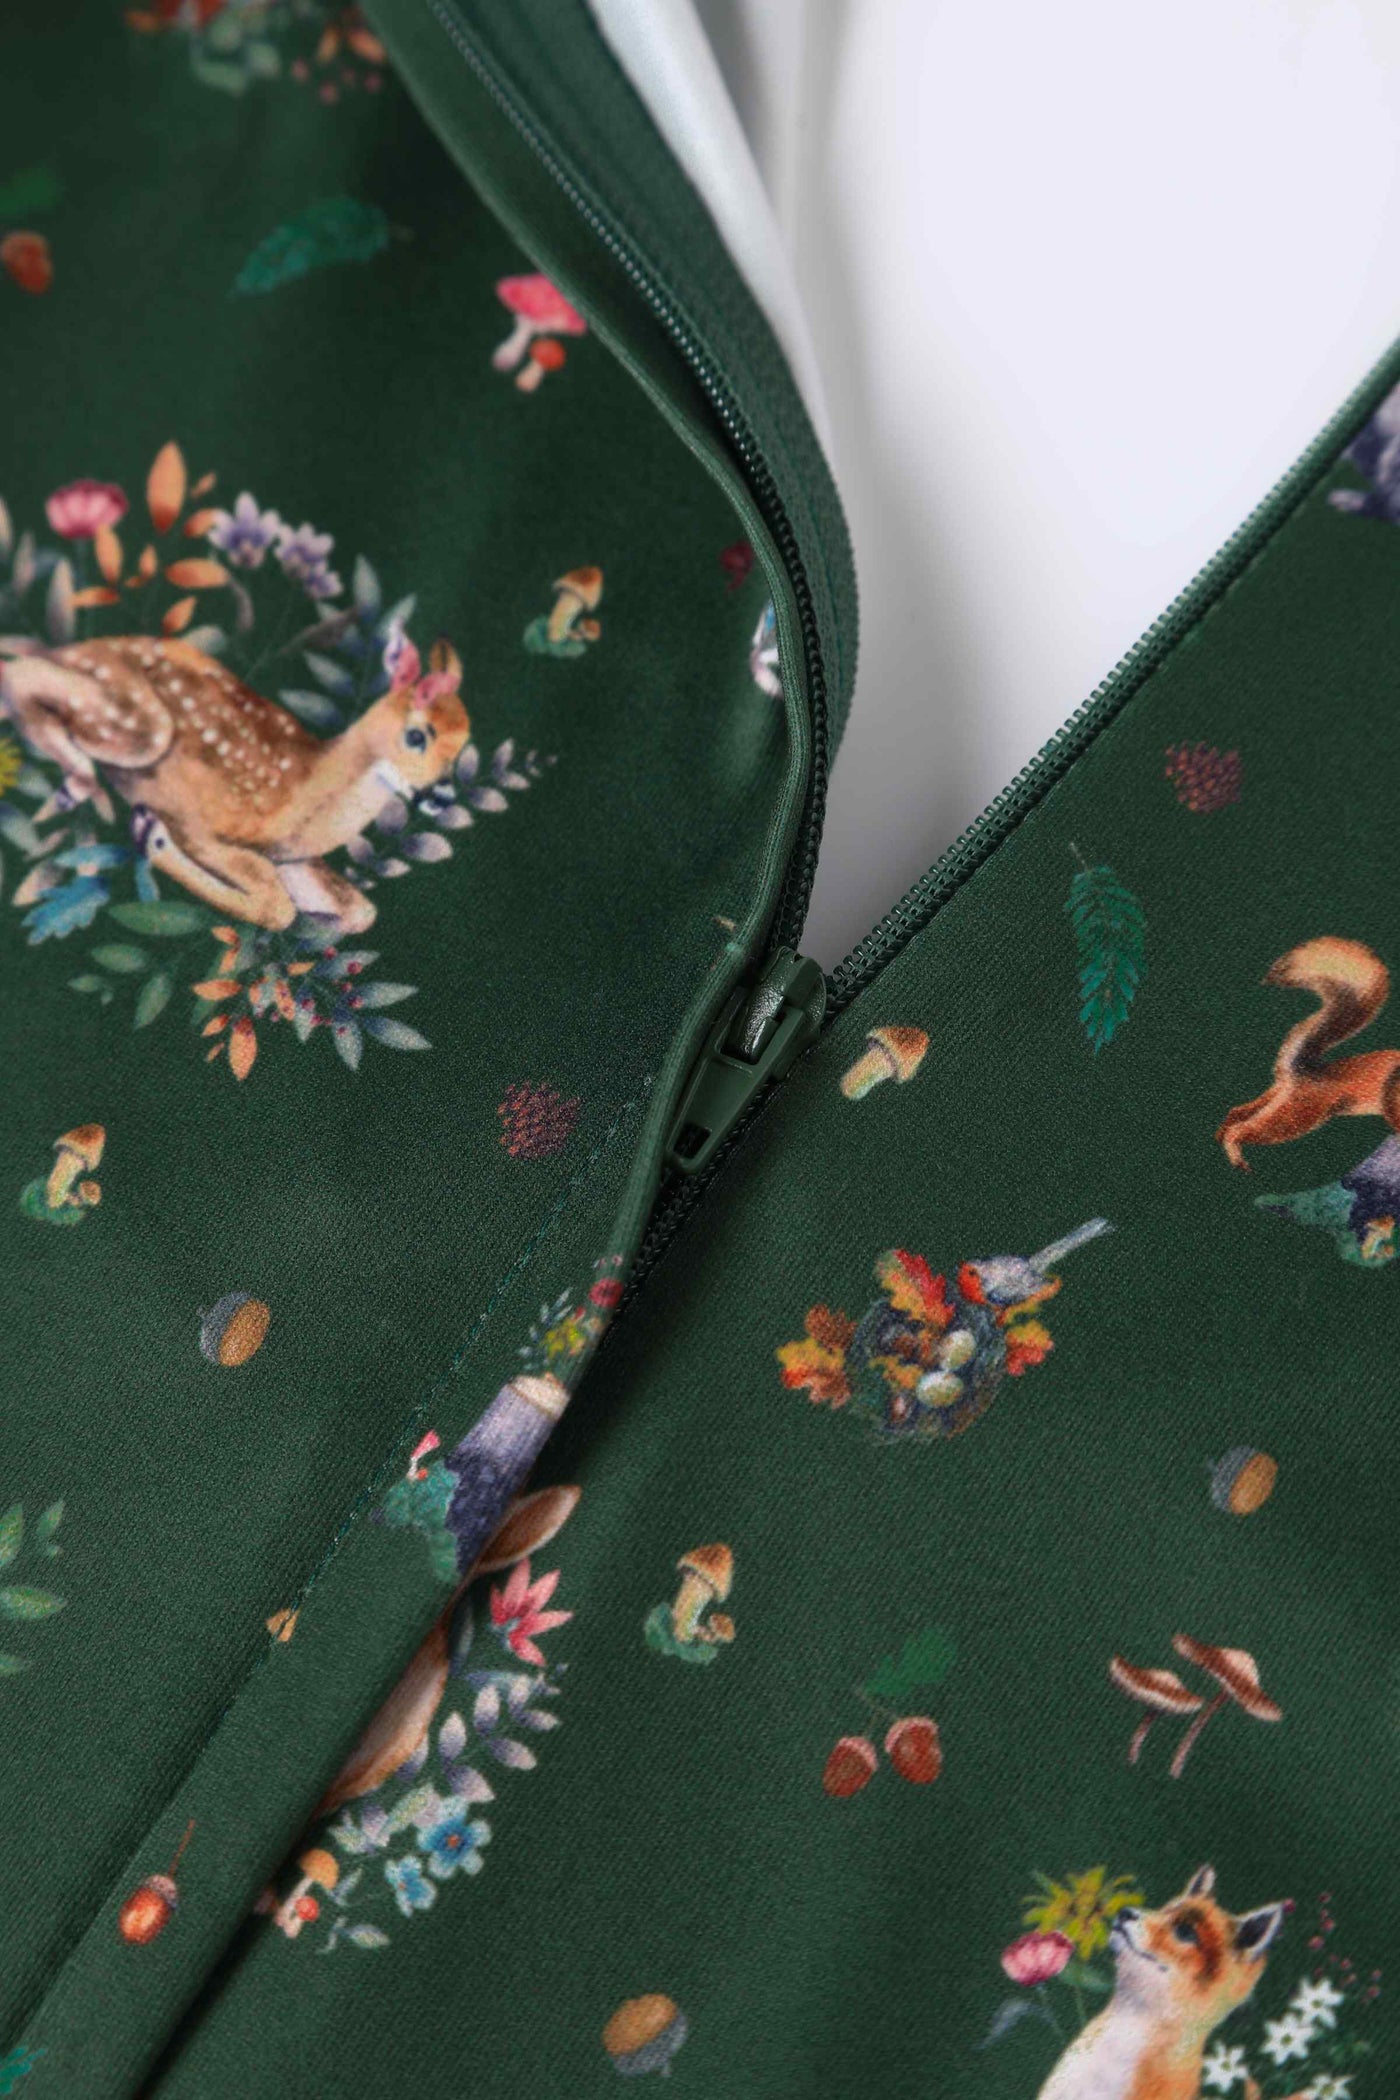 Close Up View of Lovely Woodland Fox and Owl Print Dress in Green